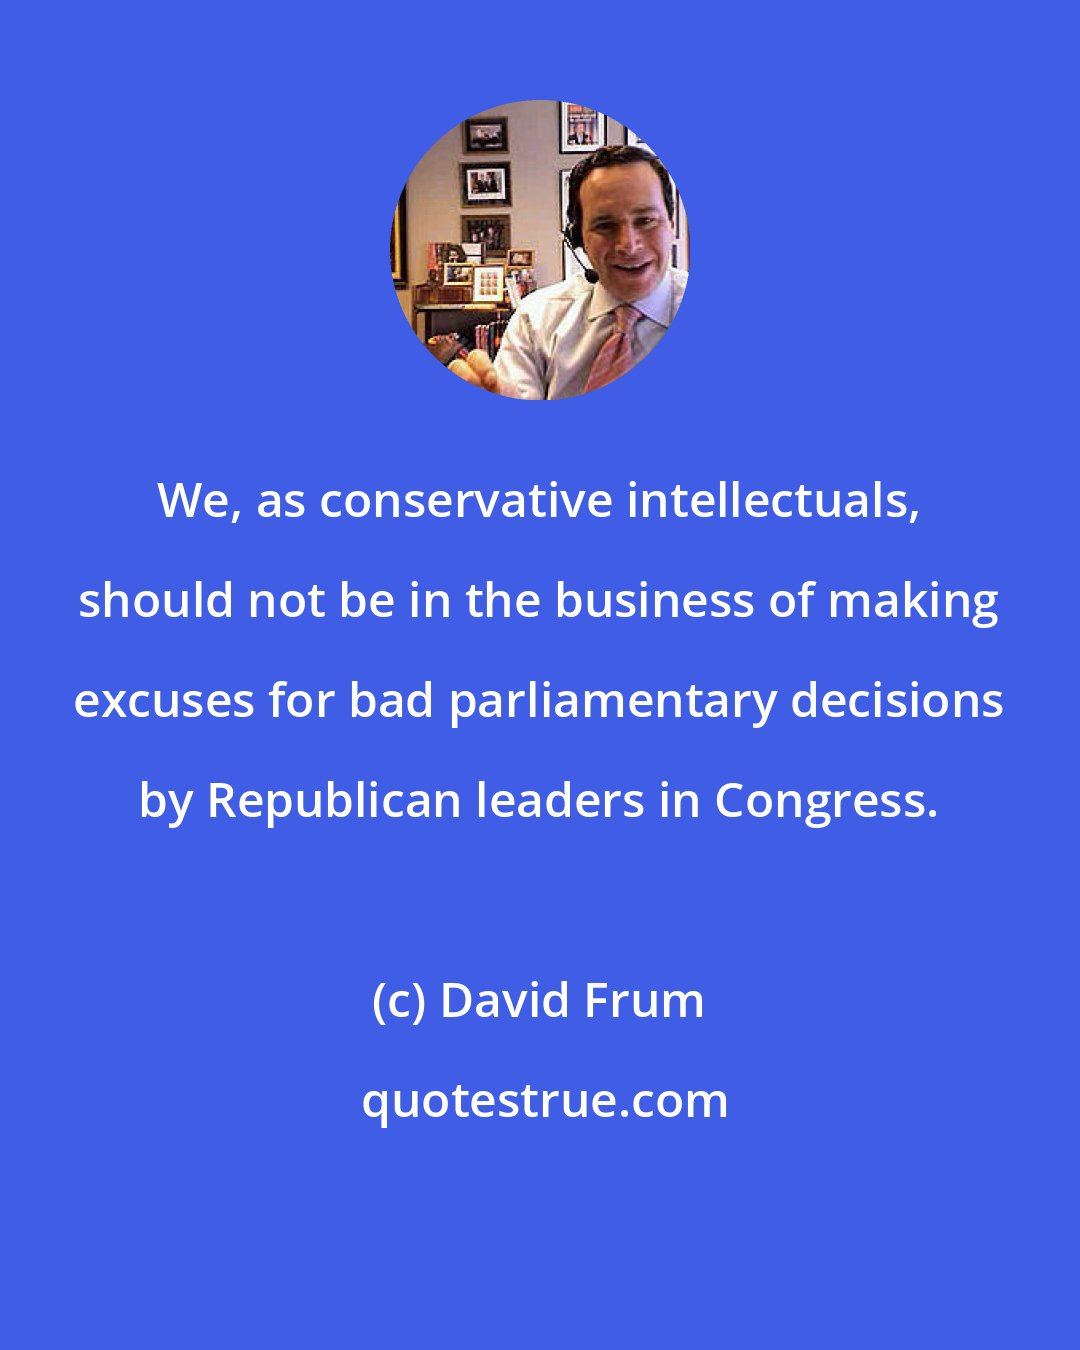 David Frum: We, as conservative intellectuals, should not be in the business of making excuses for bad parliamentary decisions by Republican leaders in Congress.